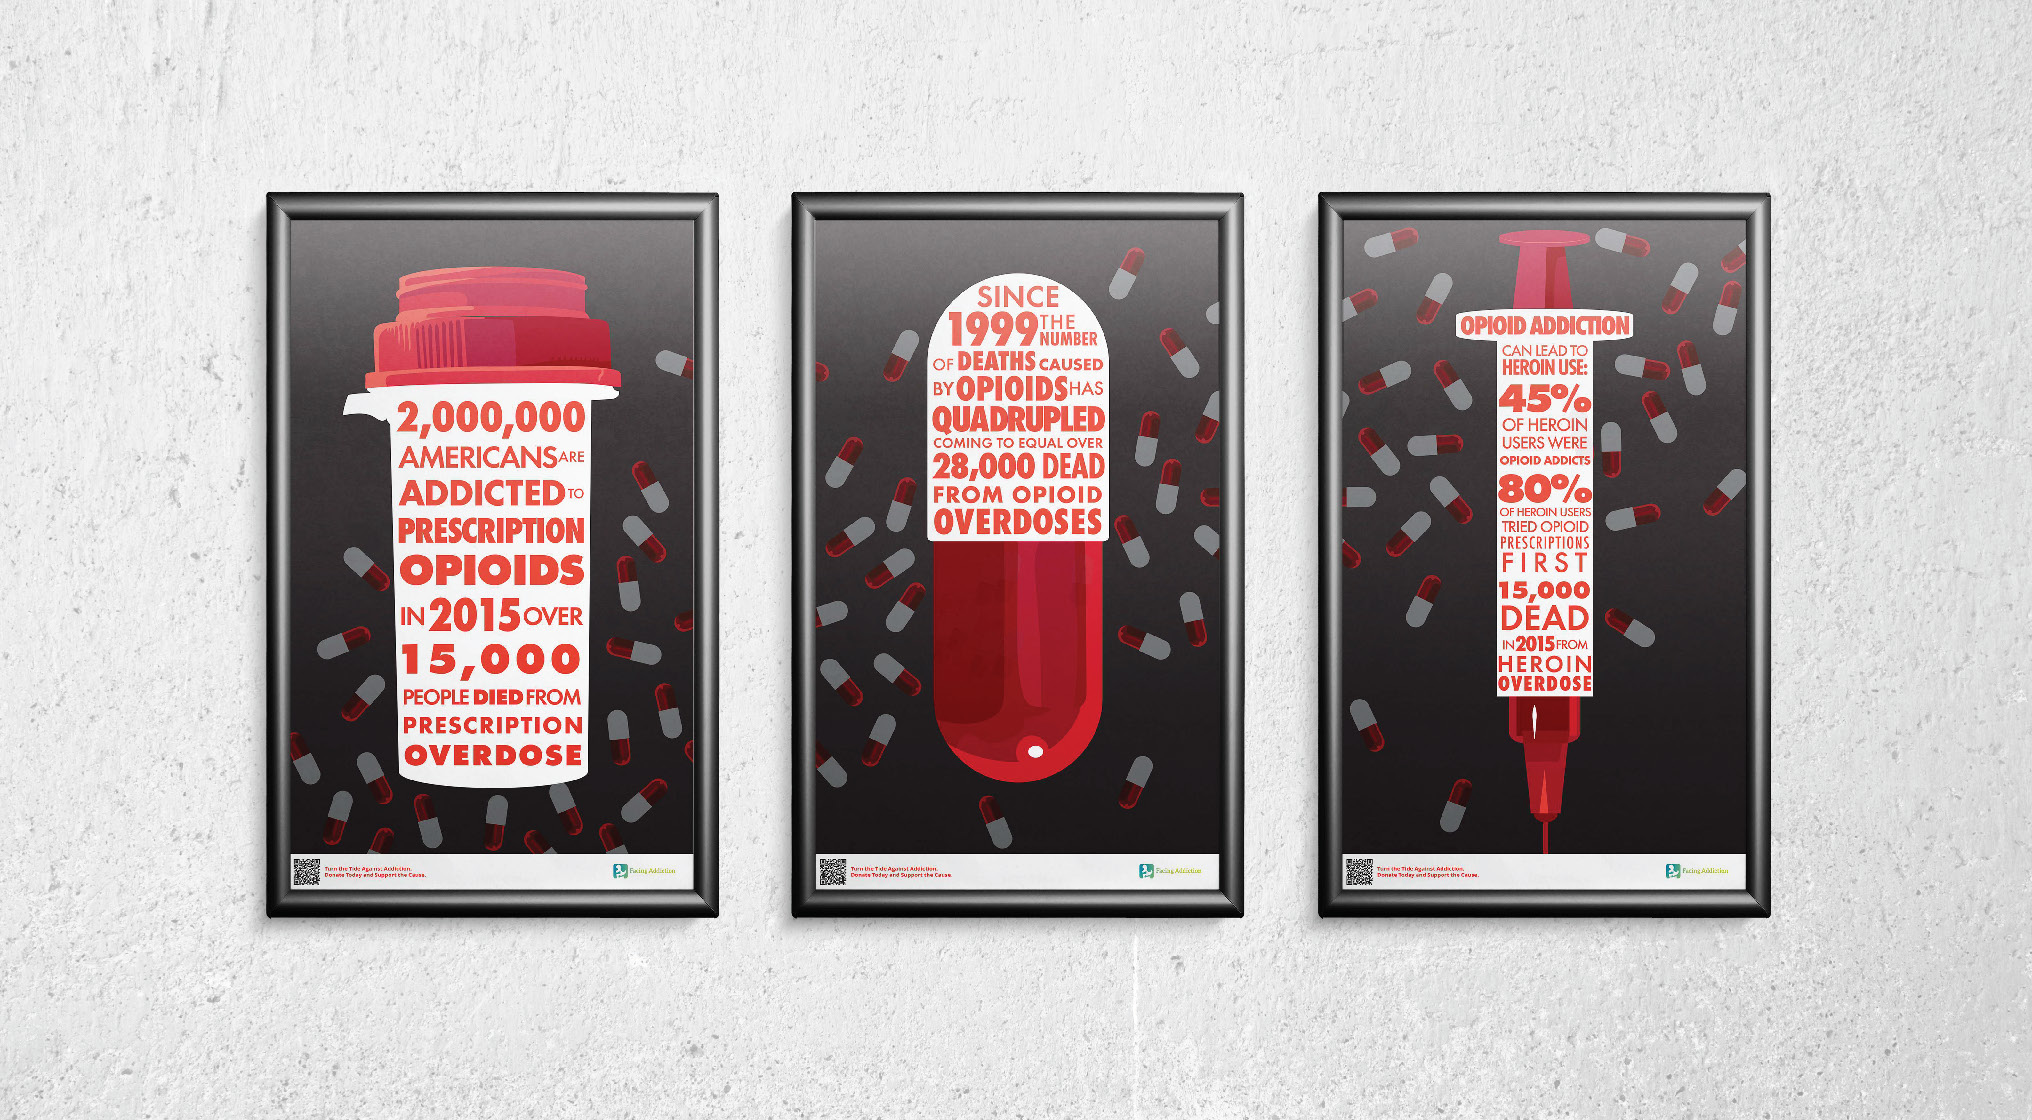 This mockup shows the poster series together in a group. By having all three posters side-by-side it is visible how they relate together and work as a series. The pill bottle, pill, and syringe follow a progression from prescription drugs to abuse and there are pills scattered throughout the background that flow from one poster to the next.